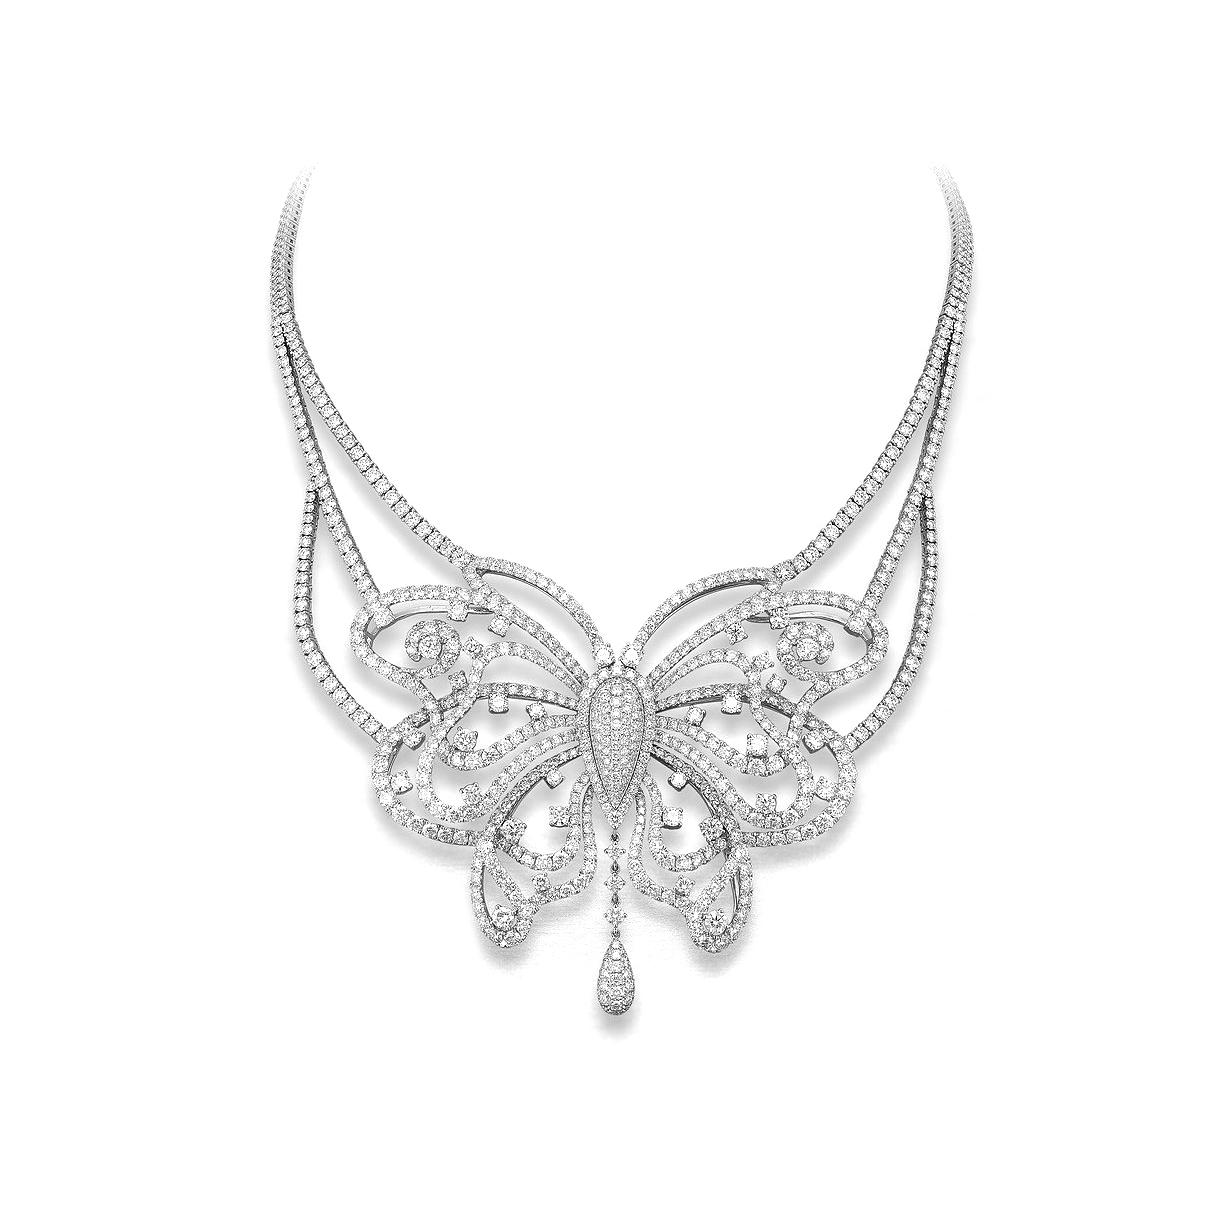 Butterfly necklace in 18kt white gold set with 907 diamonds 38.97 cts